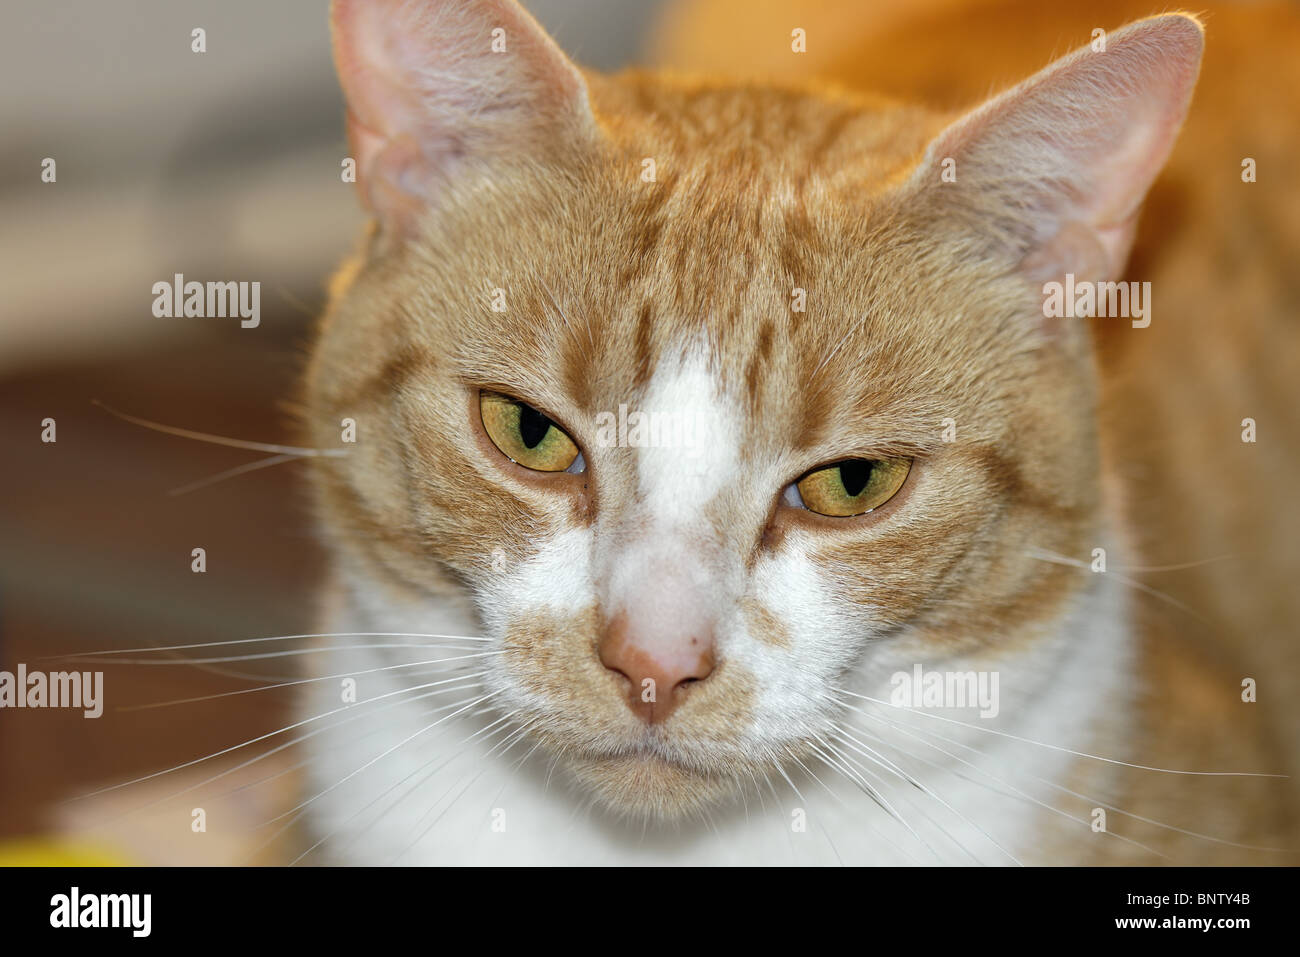 A ginger cat with eyes open and alert with ears upright Stock Photo